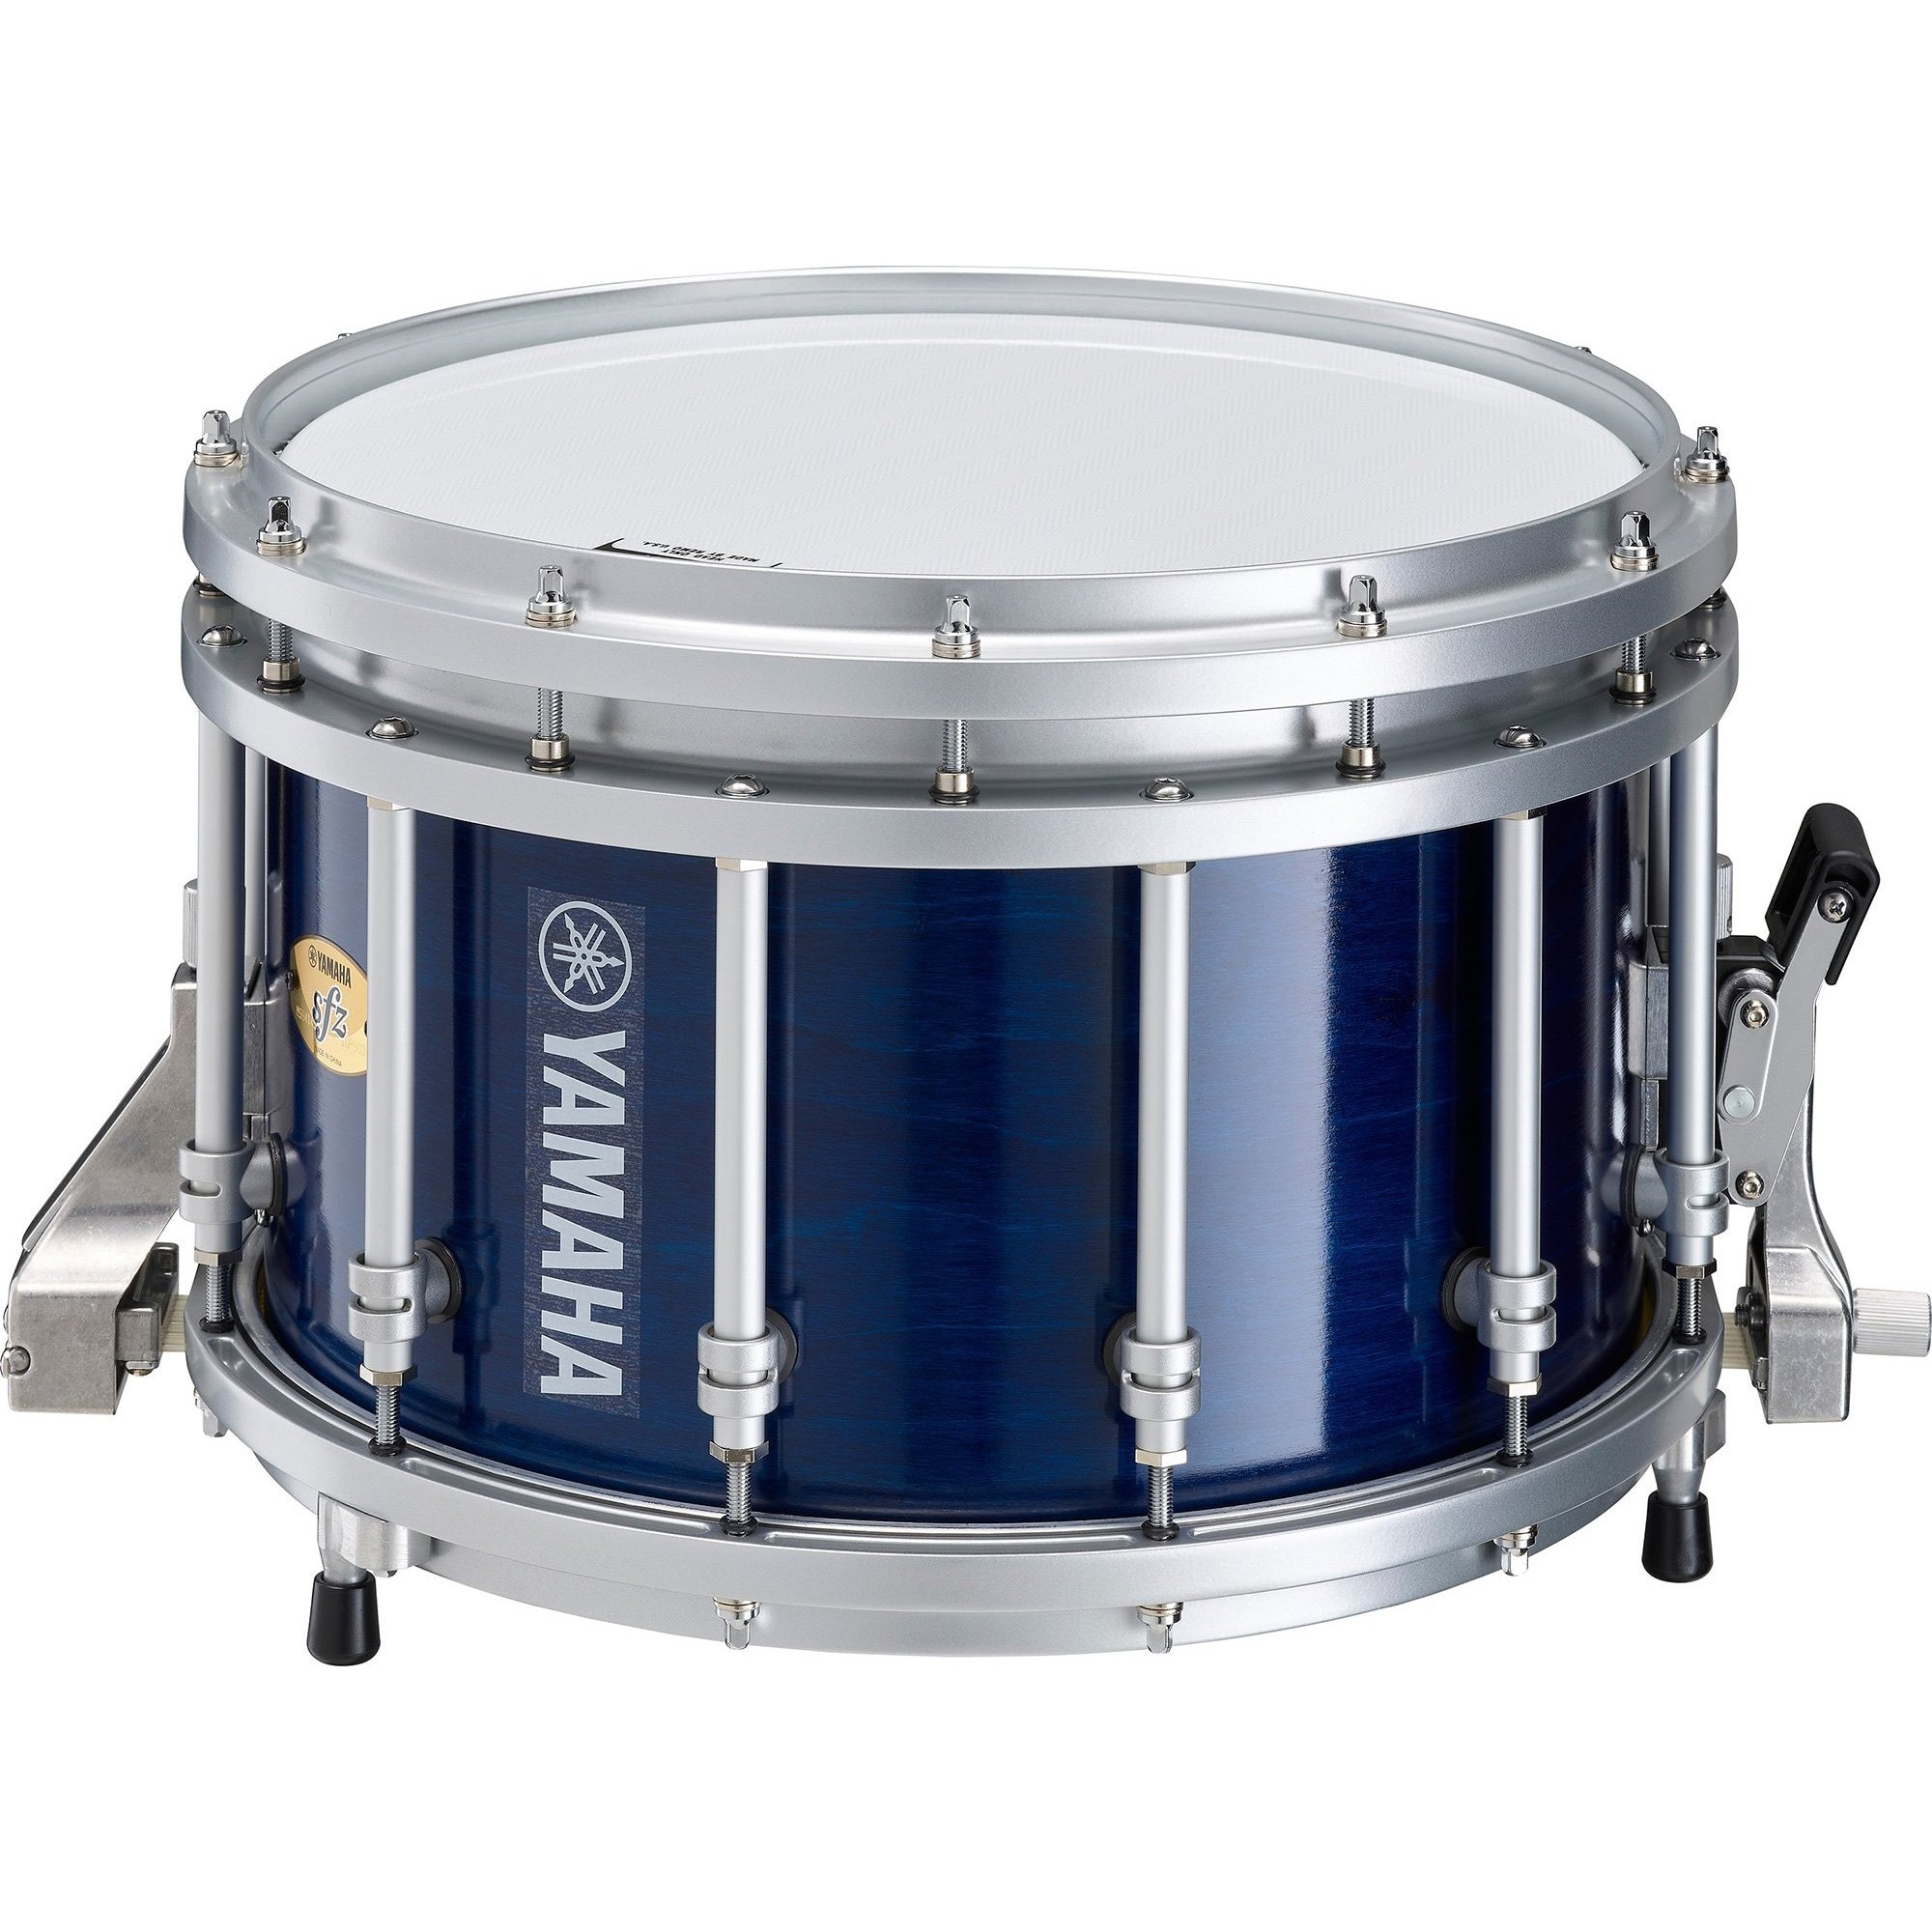 MS-9414 Series - Overview - Marching Drums - Marching Instruments 